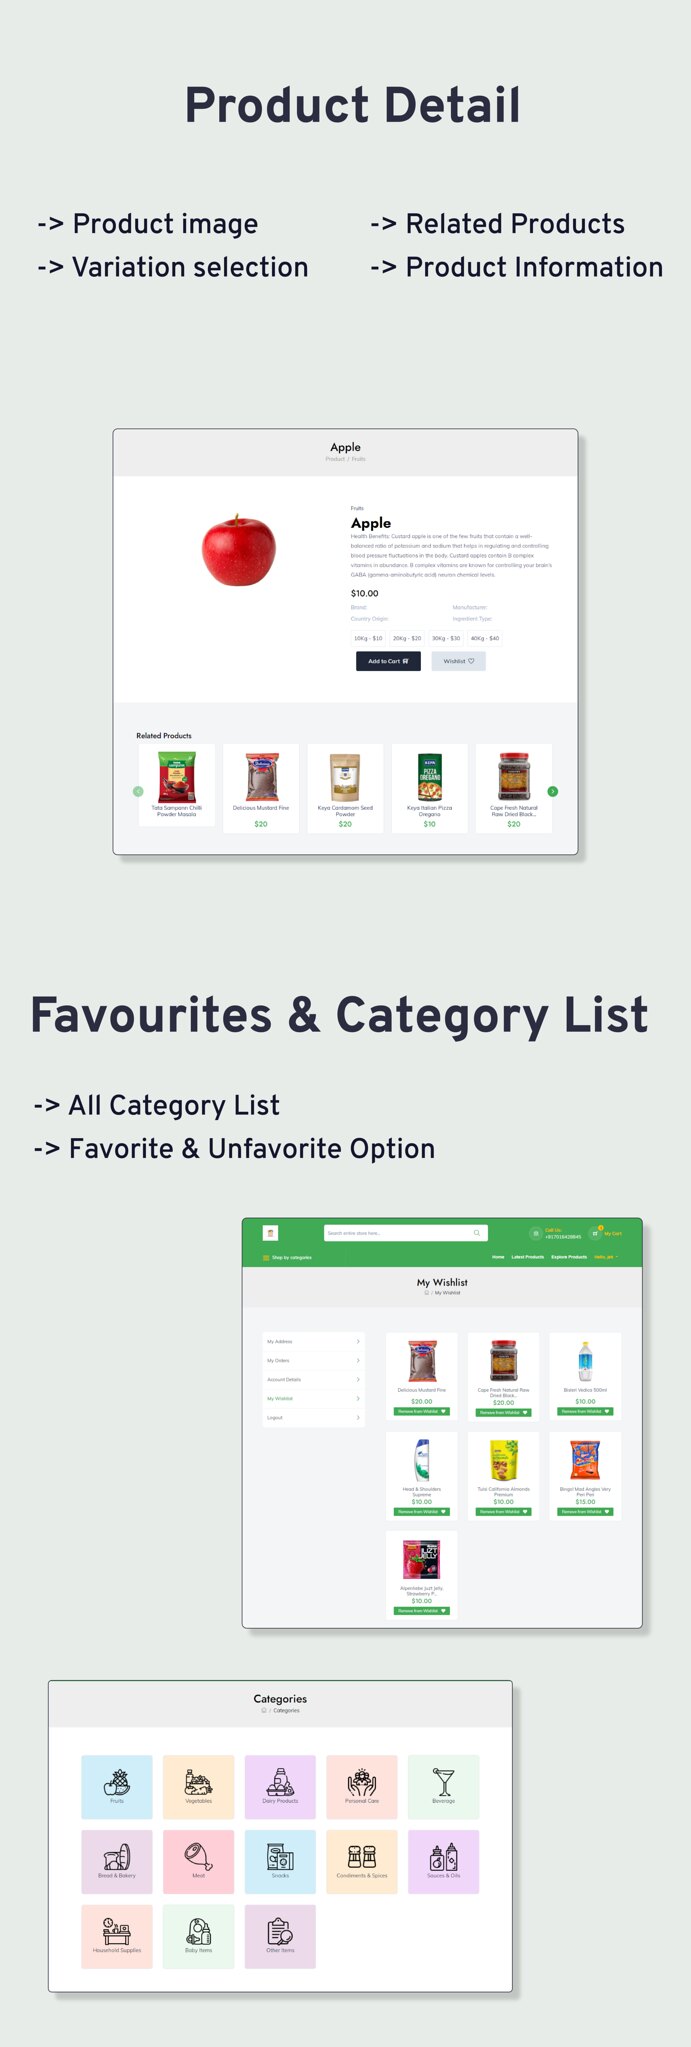 eGrocery - (Grocery, Pharmacy, eCommerce, Store) App and Web with Laravel Admin Panel + DeliveryApp - 12